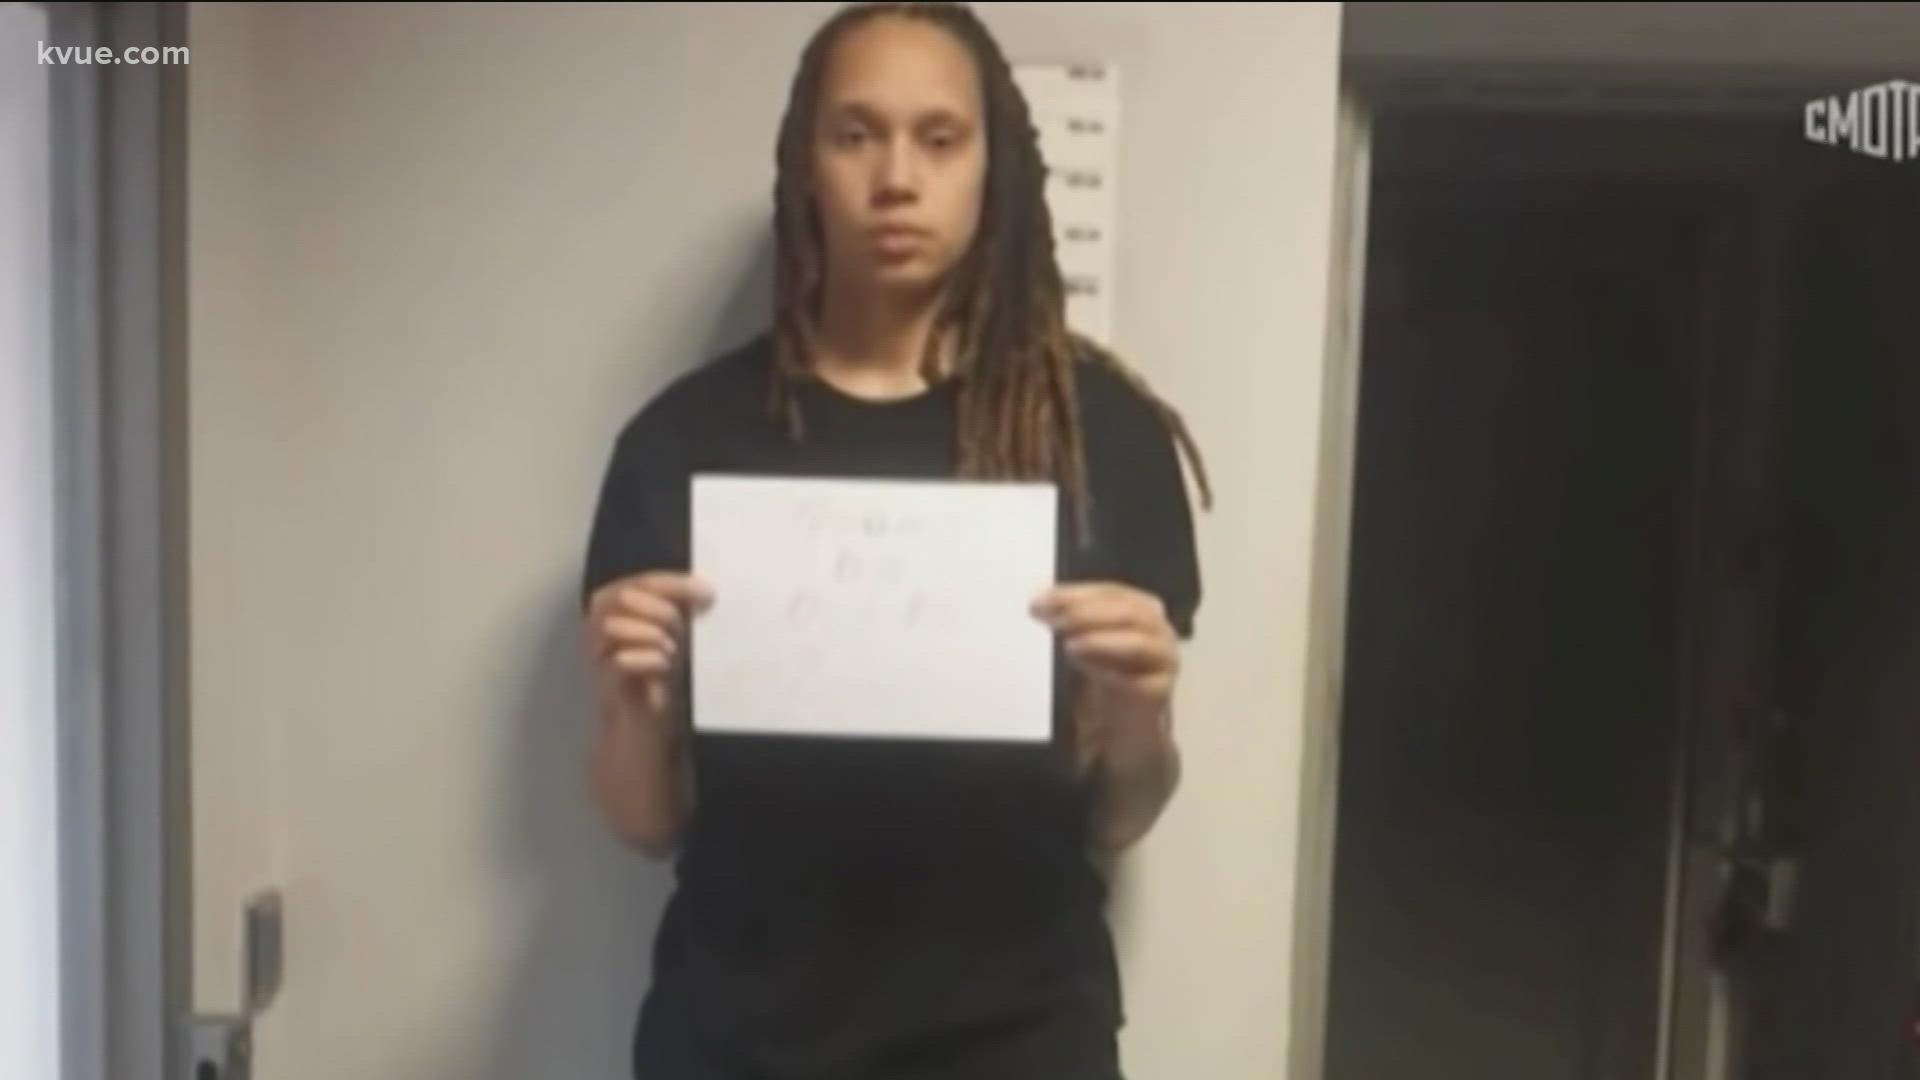 Griner was detained at an airport in February after Russian authorities said a search of her bag revealed vape cartridges containing traces of cannabis oil.